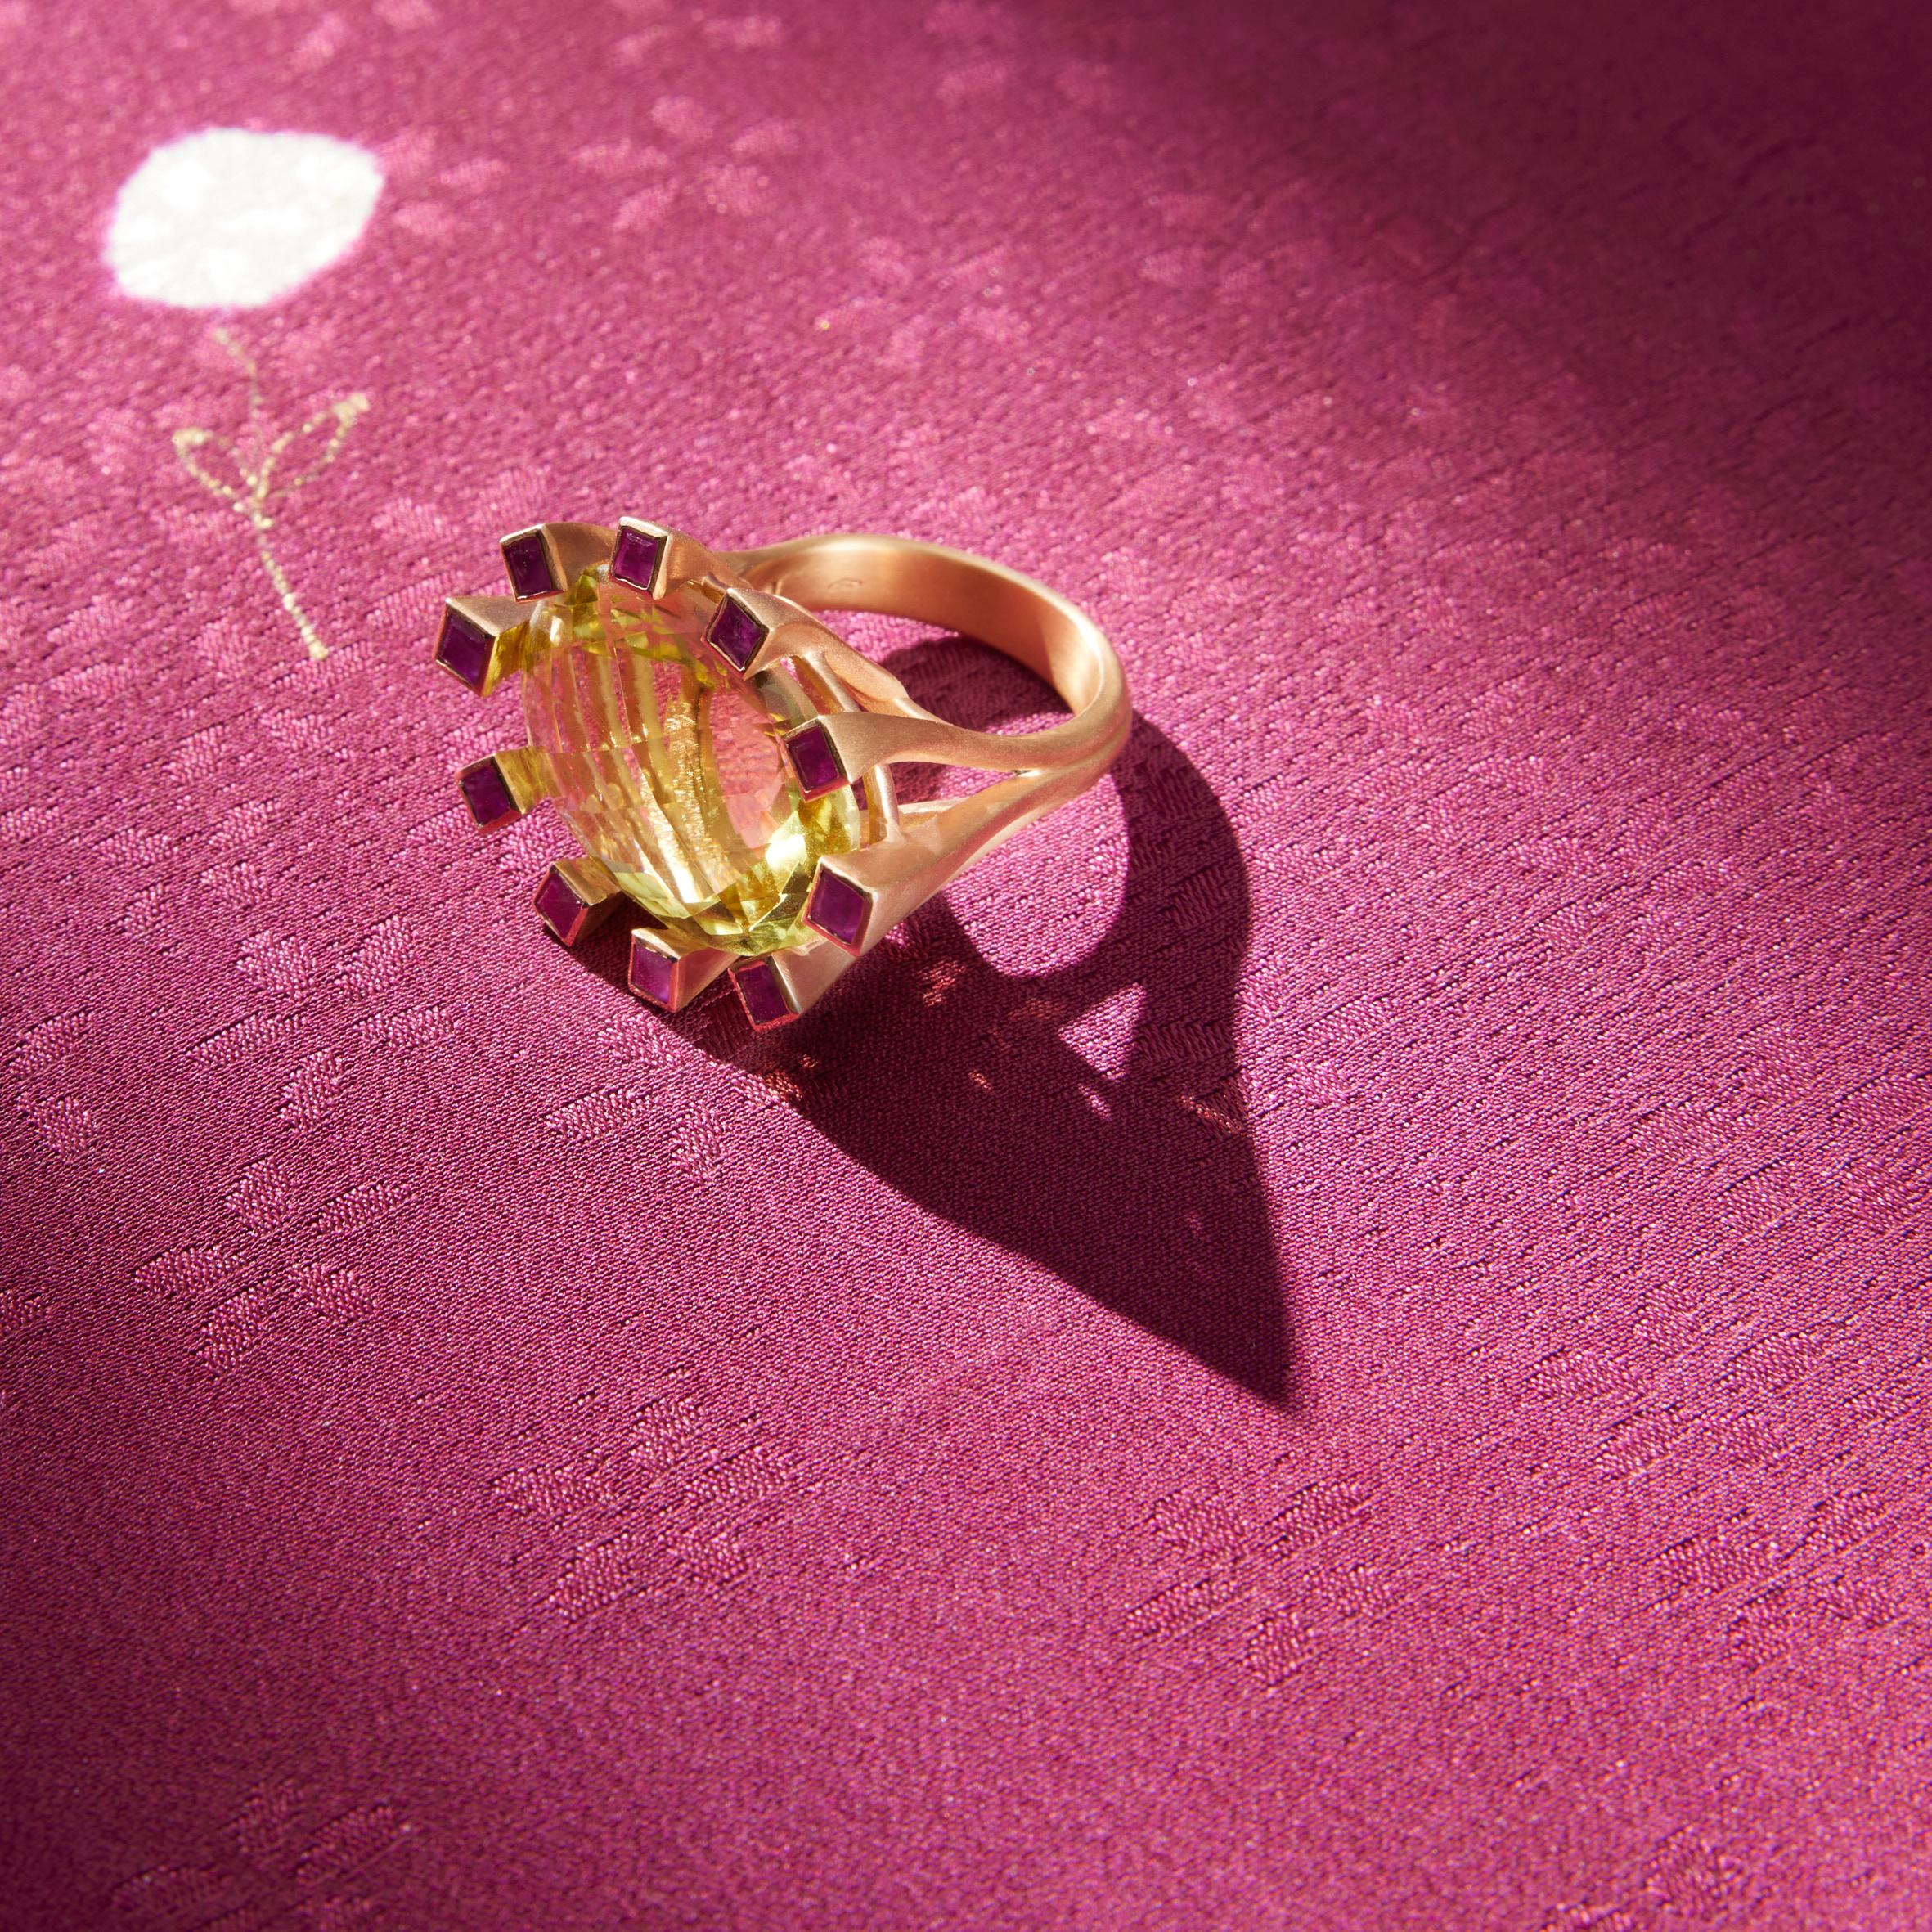 Rose Gold 21g magnificent citrine 12cts surrounded by ruby princess cut.
All Giulia Colussi jewelry is new and has never been previously owned or worn. Each item will arrive at your door beautifully gift wrapped in our boxes, put inside an elegant